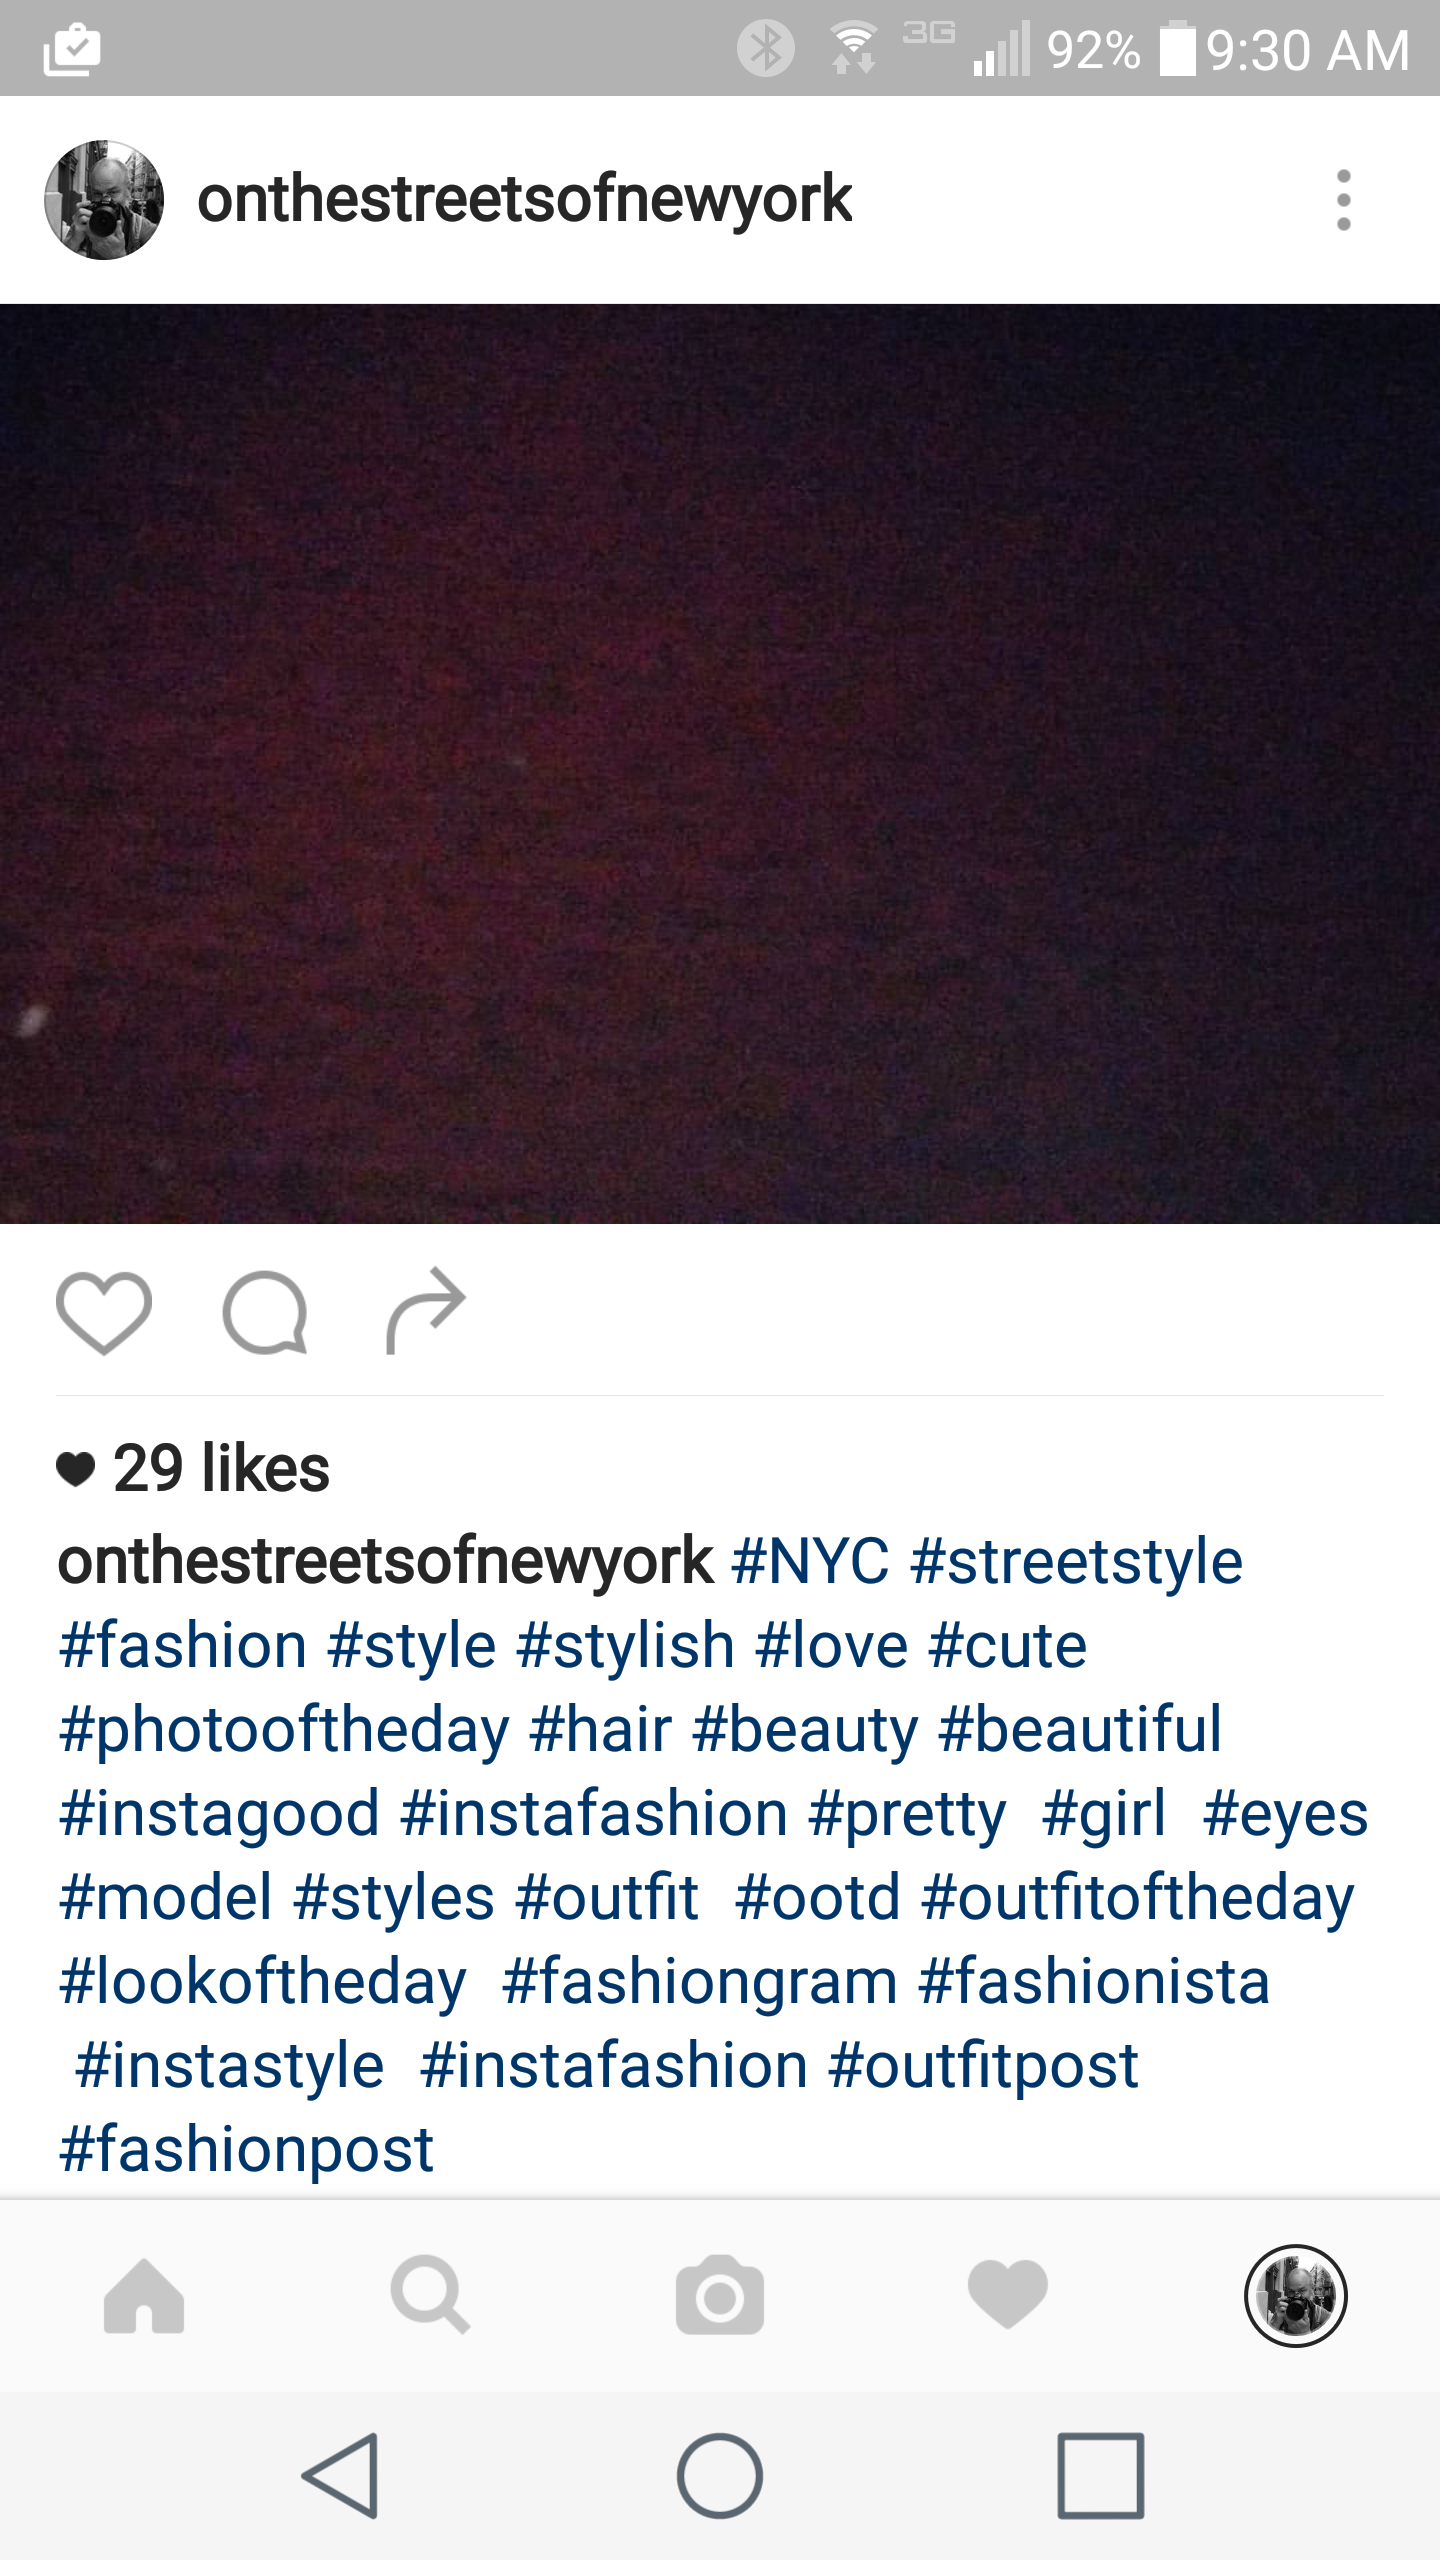 screenshot of an Instagram post with hashtags